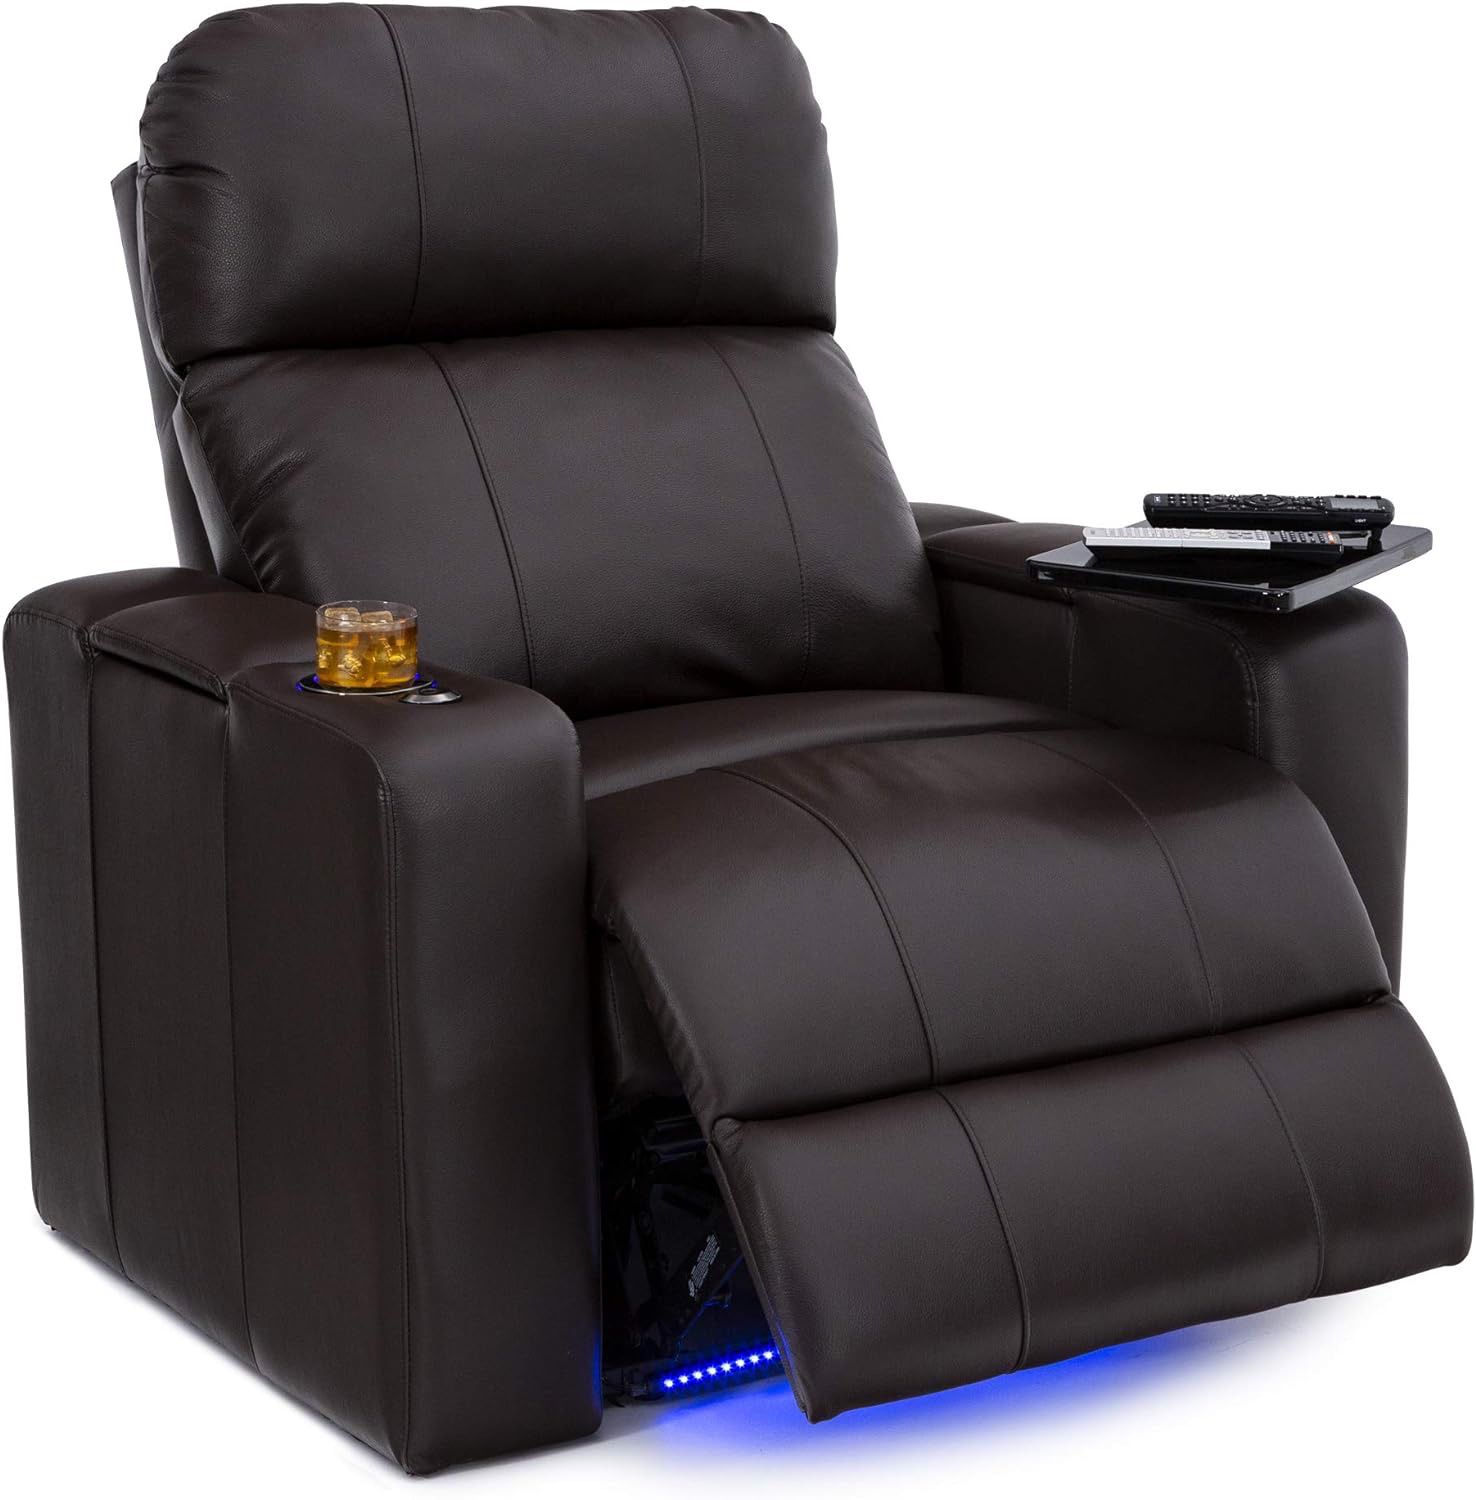 Home Theater Recliner Chair 